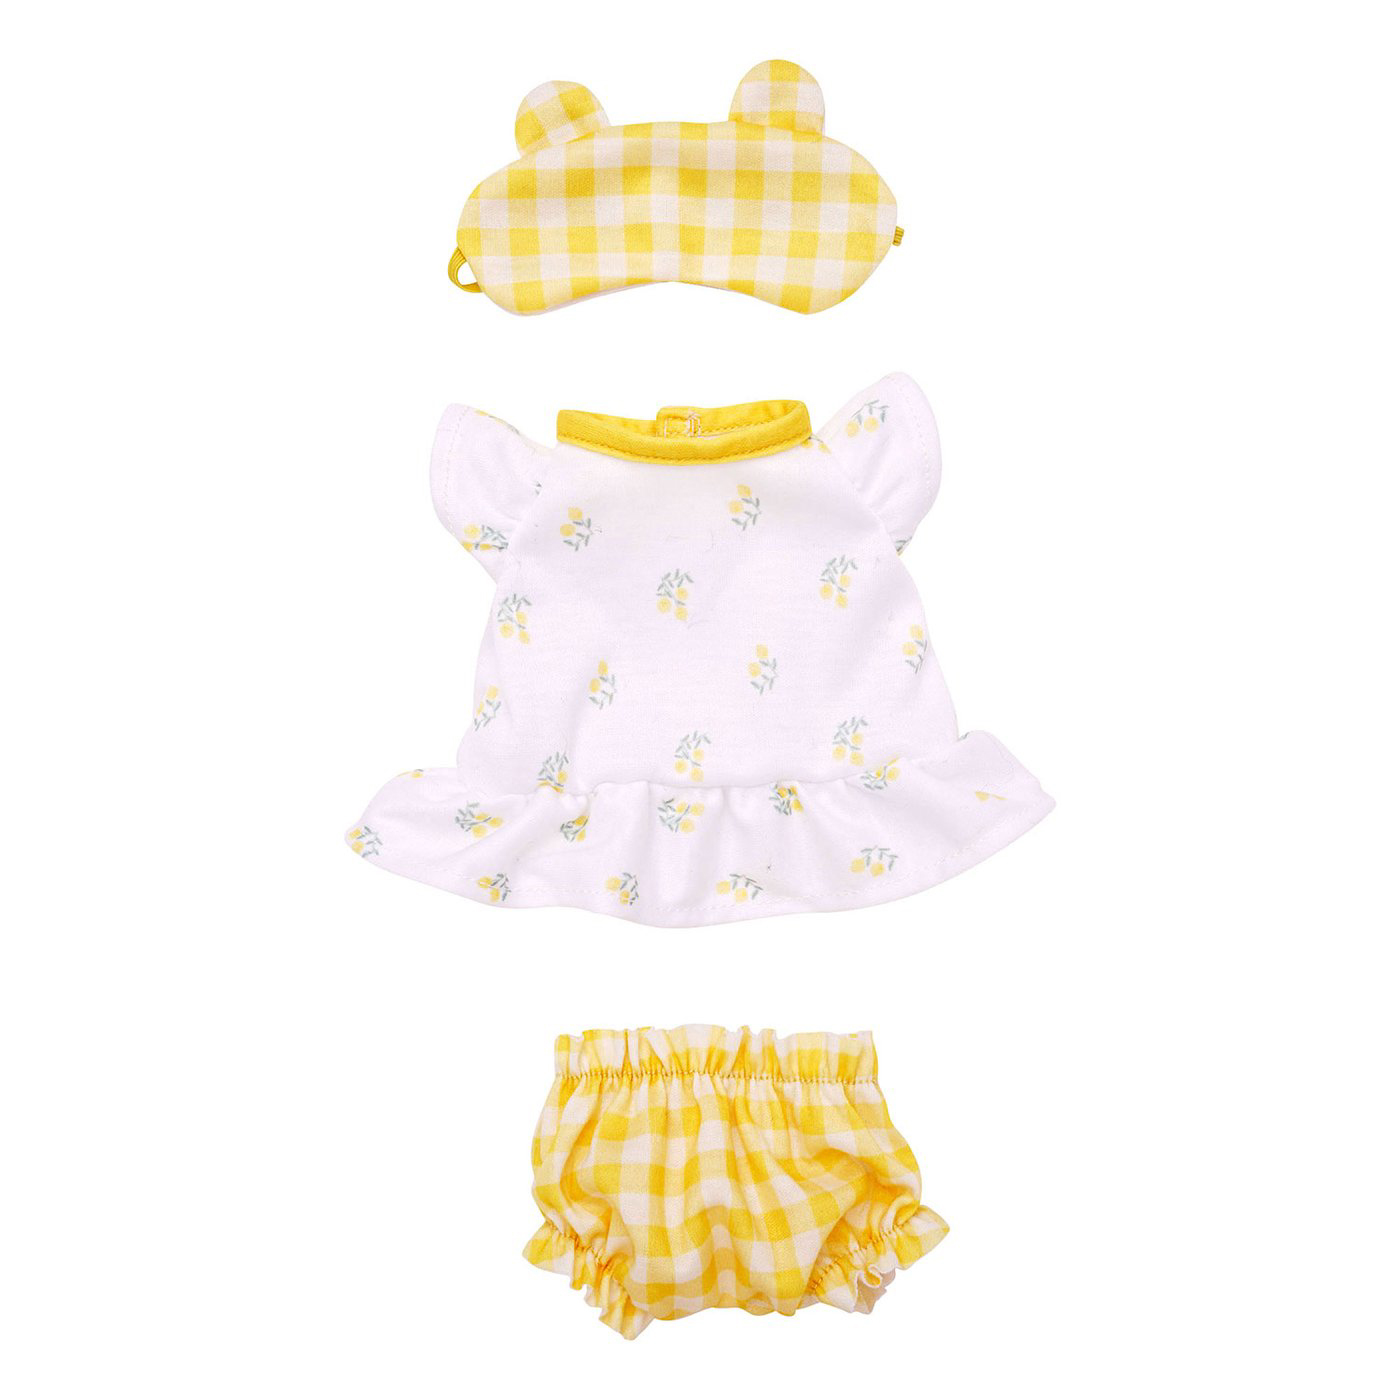 Wee Baby Stella Sweet Dreamer Outfit 1